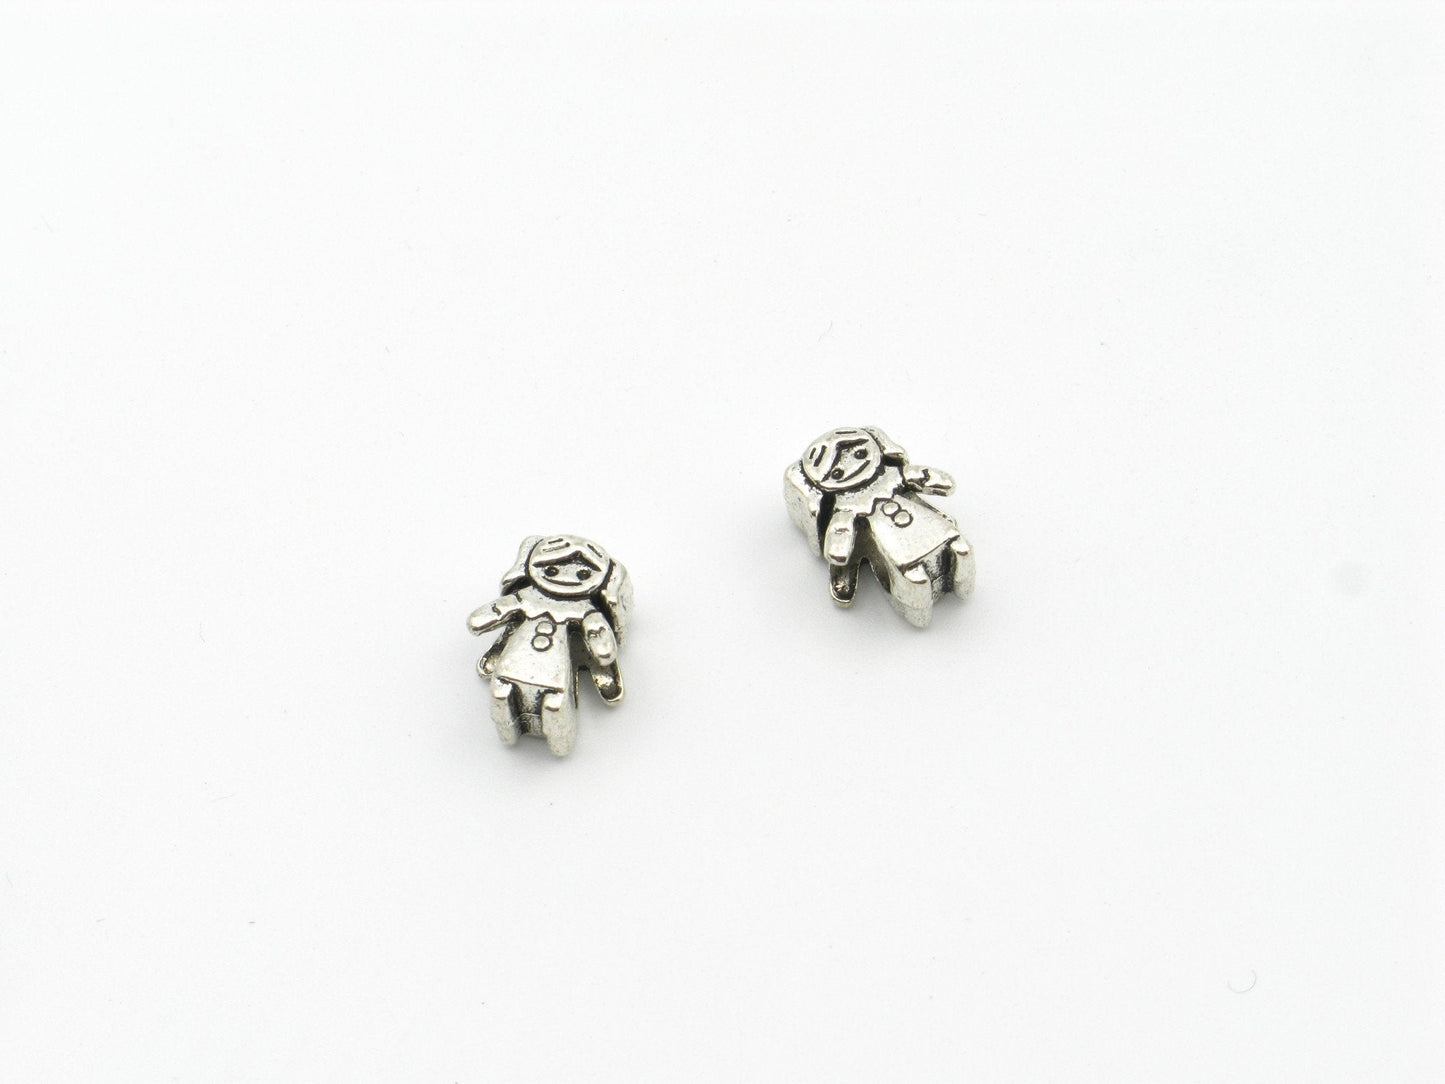 20 Pcs for 5mm round leather Antique Silver Small Girl , jewelry supplies jewelry finding D-5-5-26